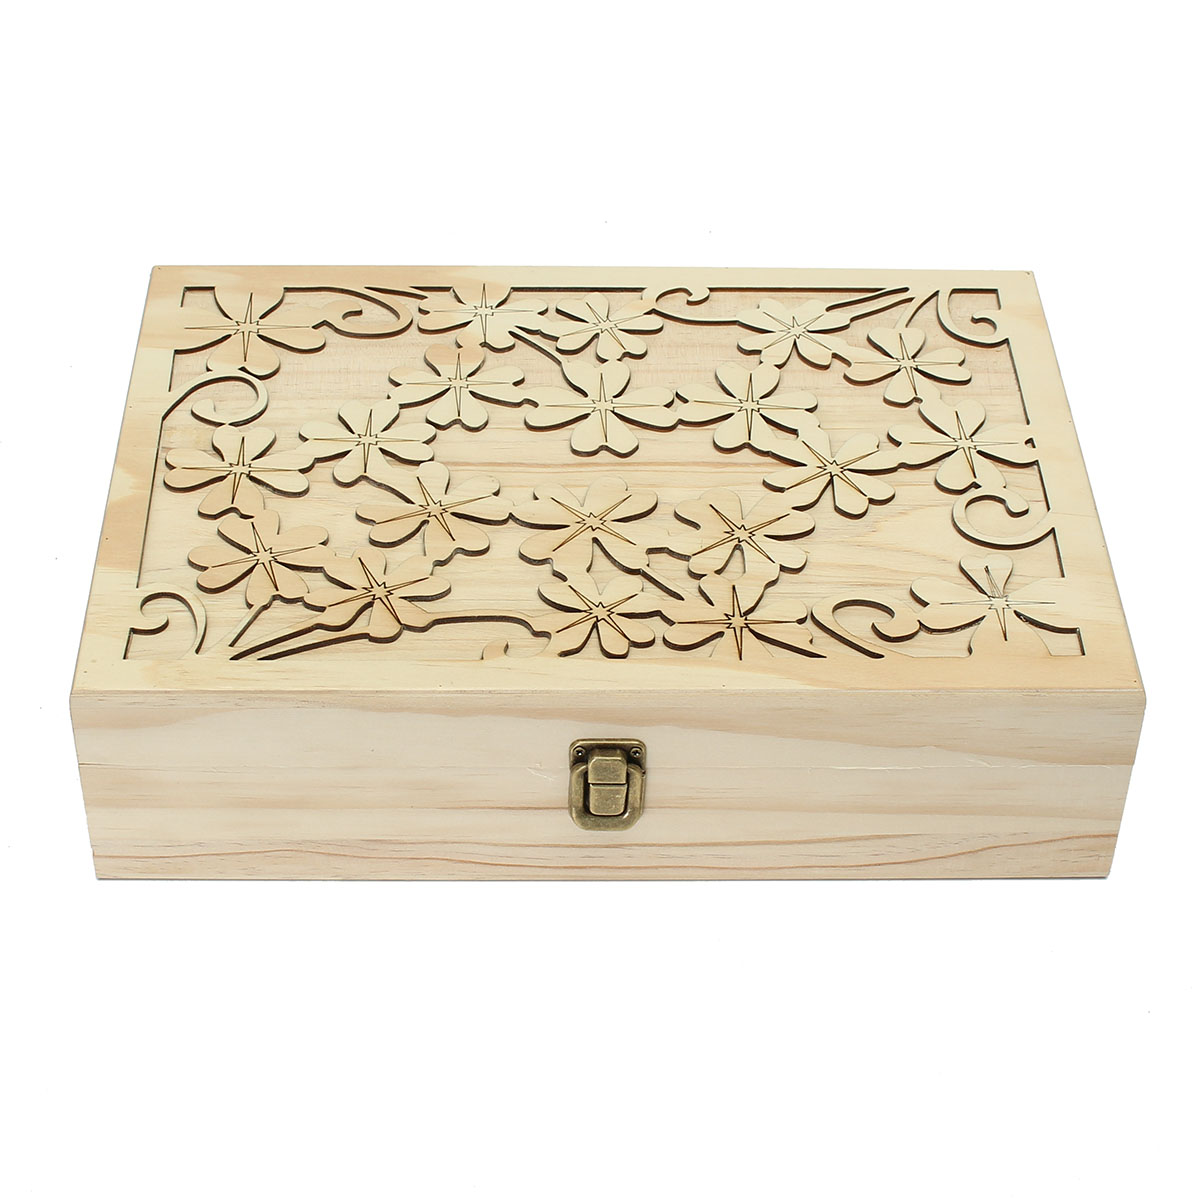 

70 Slots Wooden Carved Case Container Essential Oils Box Storage